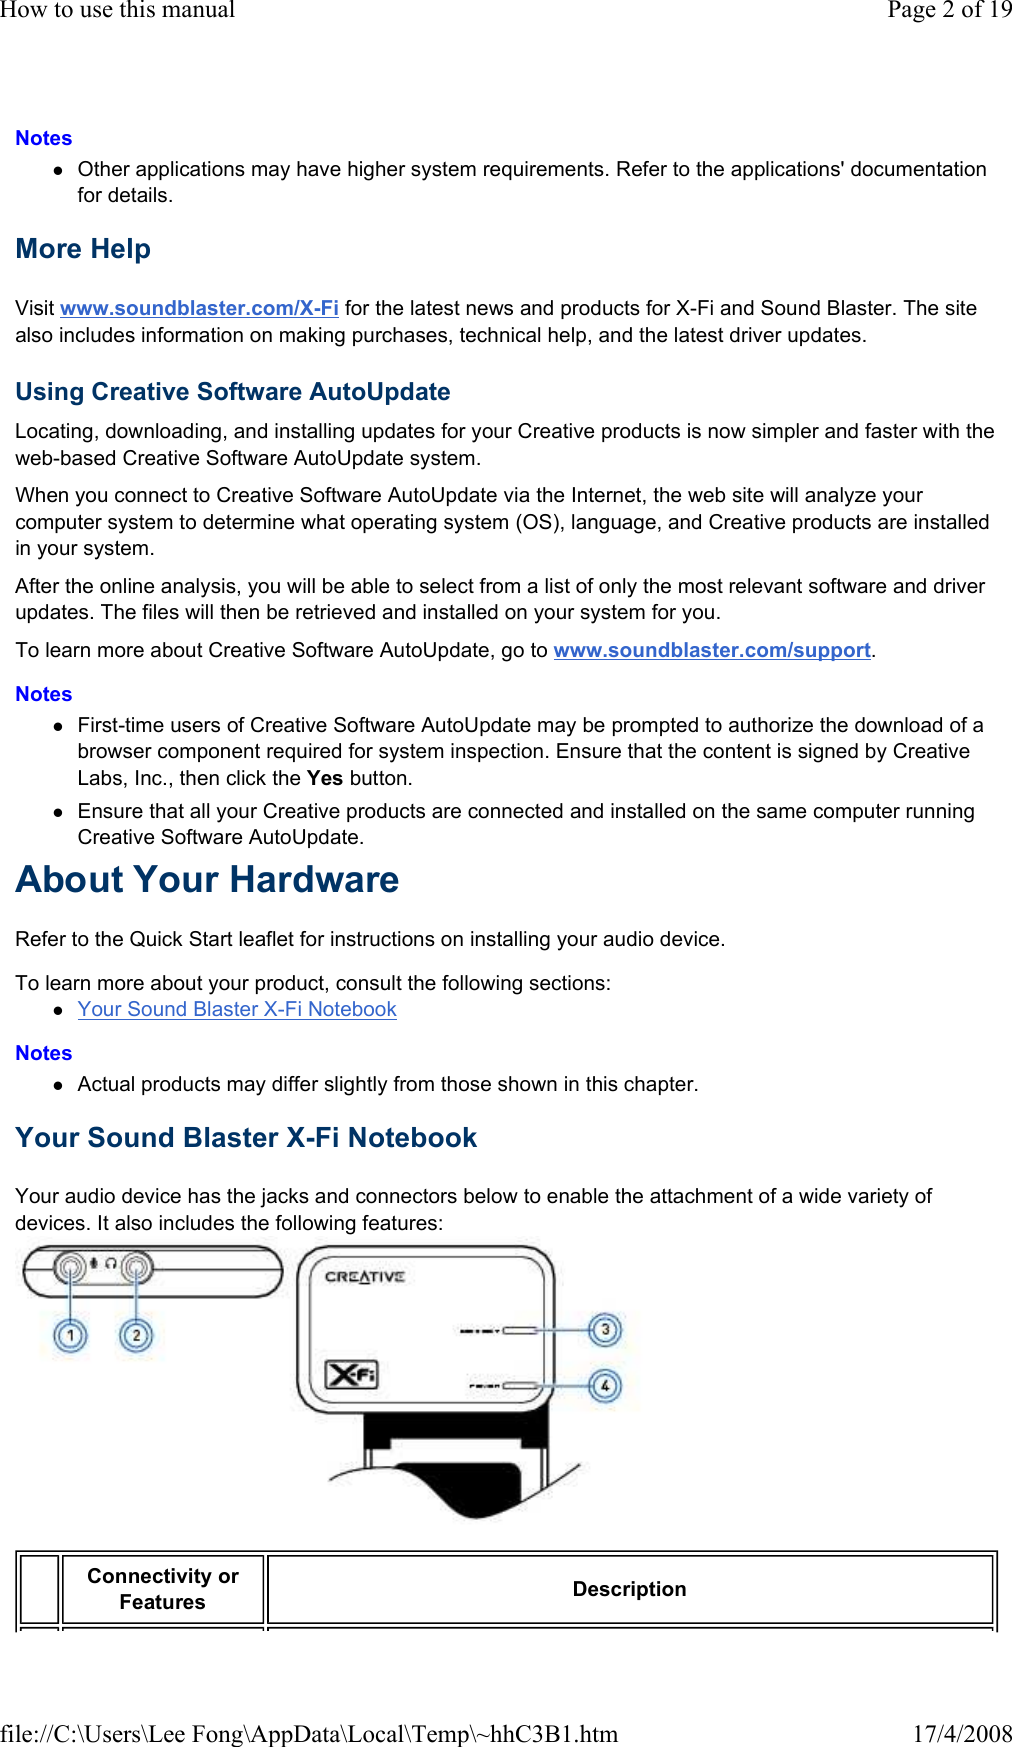 Notes  Other applications may have higher system requirements. Refer to the applications&apos; documentation for details.  More Help  Visit www.soundblaster.com/X-Fi for the latest news and products for X-Fi and Sound Blaster. The site also includes information on making purchases, technical help, and the latest driver updates.  Using Creative Software AutoUpdate  Locating, downloading, and installing updates for your Creative products is now simpler and faster with the web-based Creative Software AutoUpdate system.  When you connect to Creative Software AutoUpdate via the Internet, the web site will analyze your computer system to determine what operating system (OS), language, and Creative products are installed in your system.  After the online analysis, you will be able to select from a list of only the most relevant software and driver updates. The files will then be retrieved and installed on your system for you.  To learn more about Creative Software AutoUpdate, go to www.soundblaster.com/support.  Notes  First-time users of Creative Software AutoUpdate may be prompted to authorize the download of a browser component required for system inspection. Ensure that the content is signed by Creative Labs, Inc., then click the Yes button.  Ensure that all your Creative products are connected and installed on the same computer running Creative Software AutoUpdate.  About Your Hardware  Refer to the Quick Start leaflet for instructions on installing your audio device.  To learn more about your product, consult the following sections:  Your Sound Blaster X-Fi Notebook  Notes  Actual products may differ slightly from those shown in this chapter.  Your Sound Blaster X-Fi Notebook  Your audio device has the jacks and connectors below to enable the attachment of a wide variety of devices. It also includes the following features:   Connectivity or Features   Description  Page 2 of 19How to use this manual17/4/2008file://C:\Users\Lee Fong\AppData\Local\Temp\~hhC3B1.htm